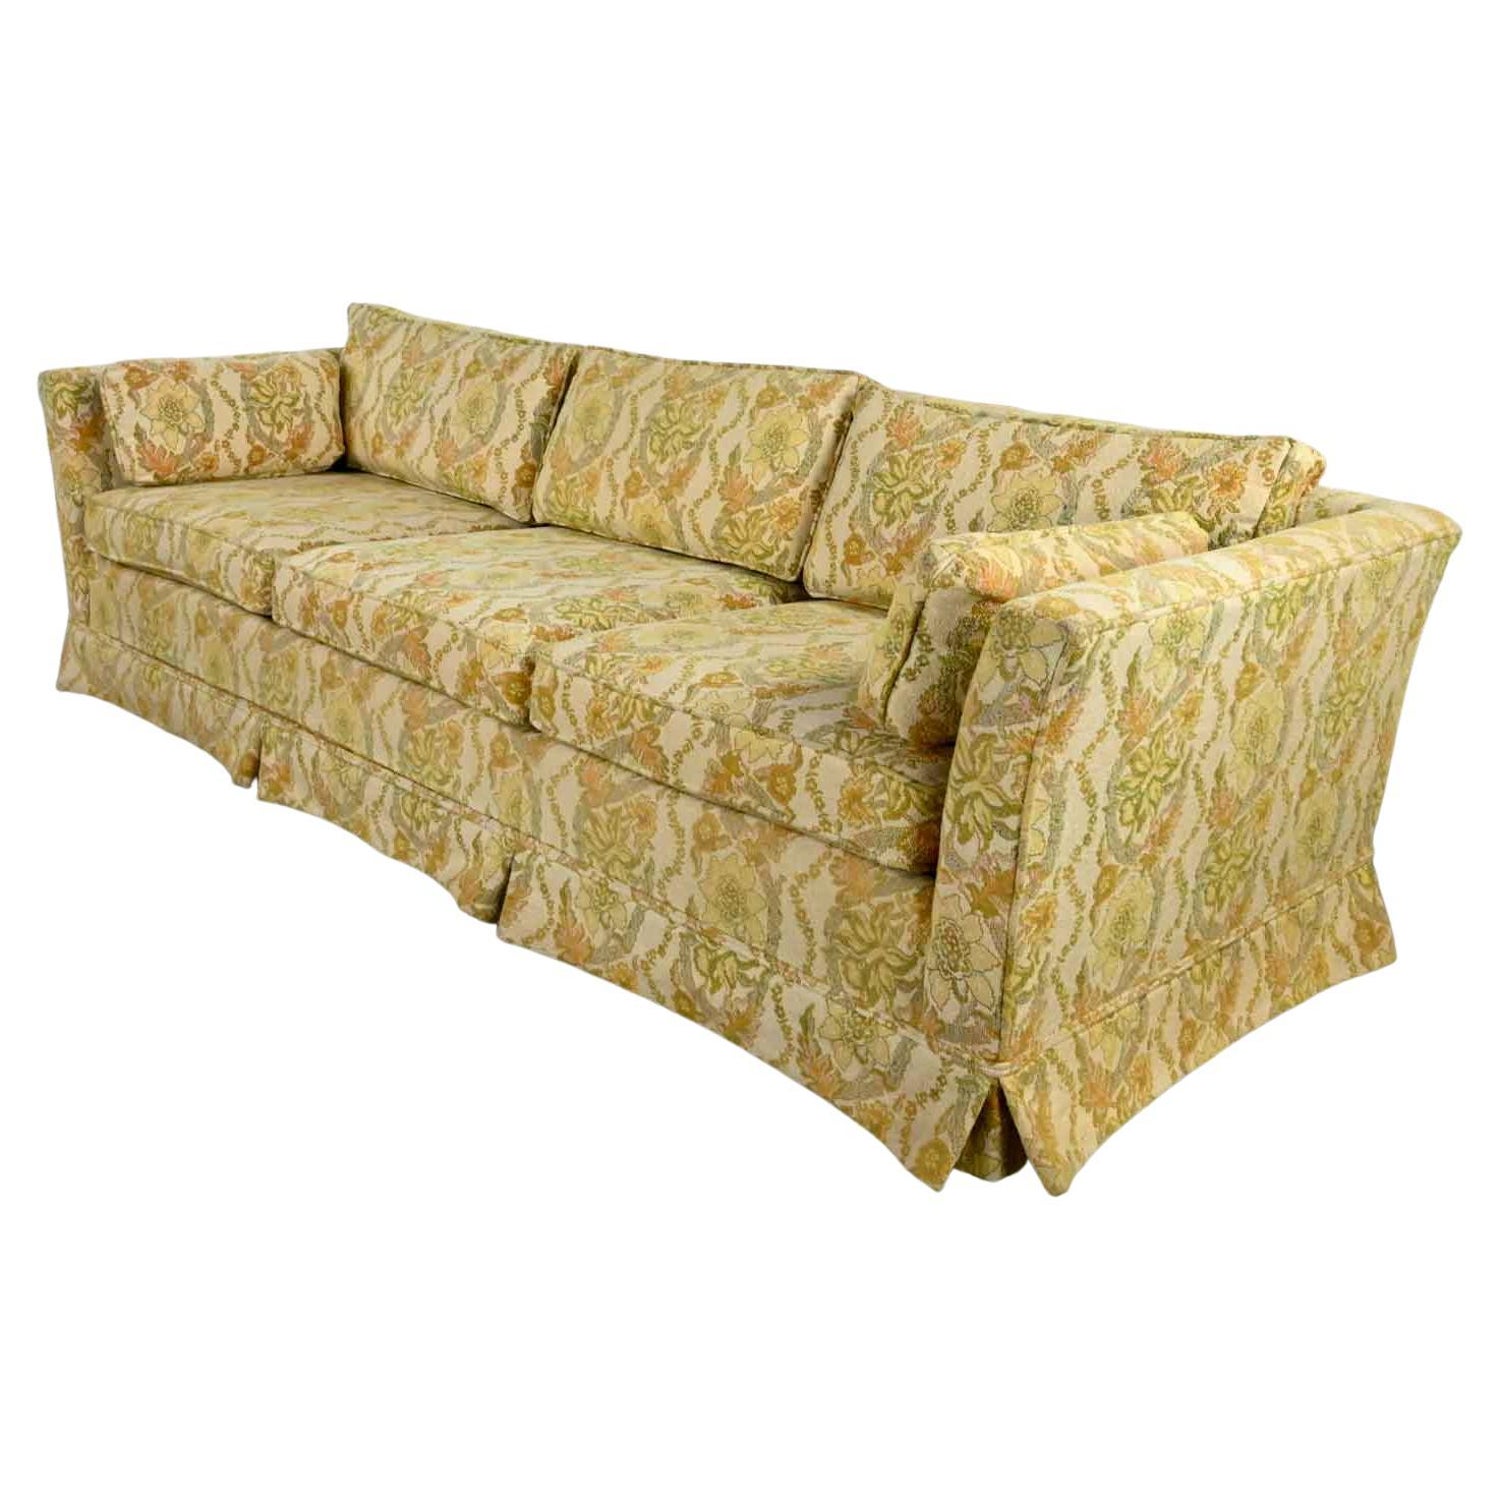 MCM Broyhill Furn Flared Tuxedo Sofa Lt Yellow Floral Fabric by Lenoir  Chair Co. For Sale at 1stDibs | broyhill sofa, broyhill floral couch,  broyhill corduroy sofa